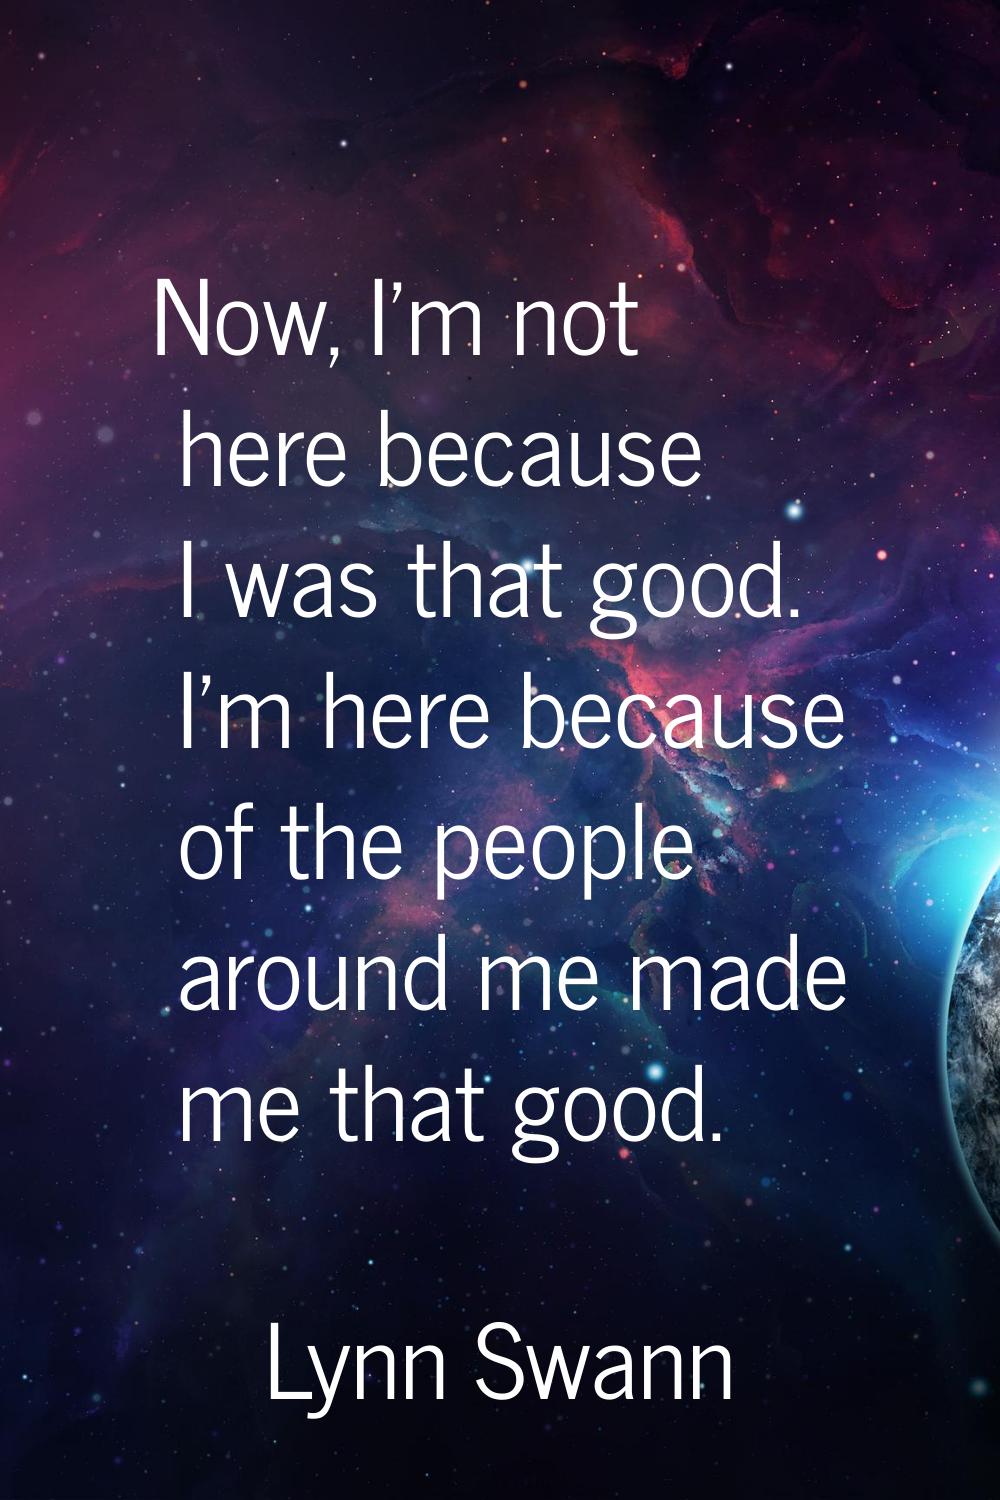 Now, I'm not here because I was that good. I'm here because of the people around me made me that go